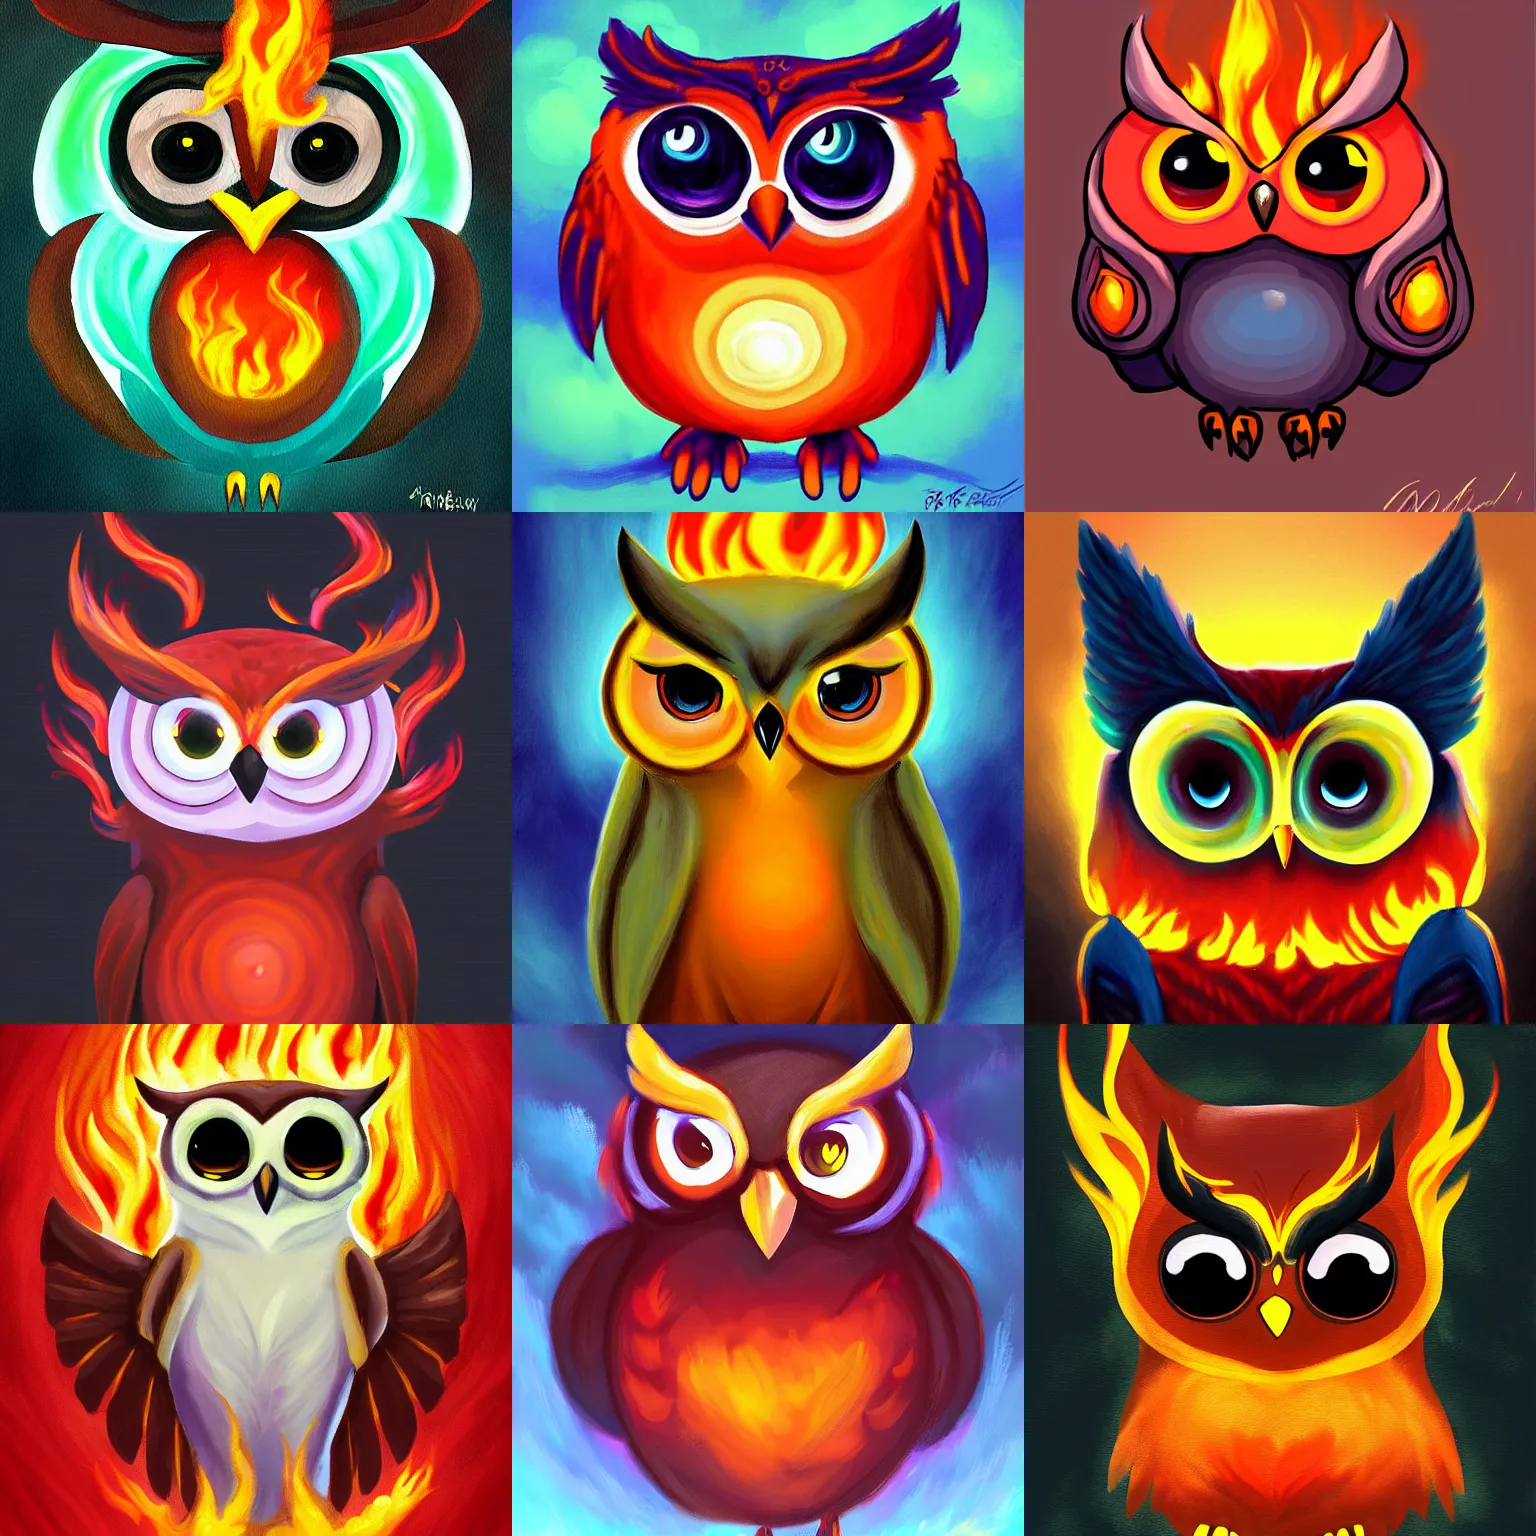 Prompt: full shot,a painting of cute owl Pokémon with big eyes made of flame,Digital art